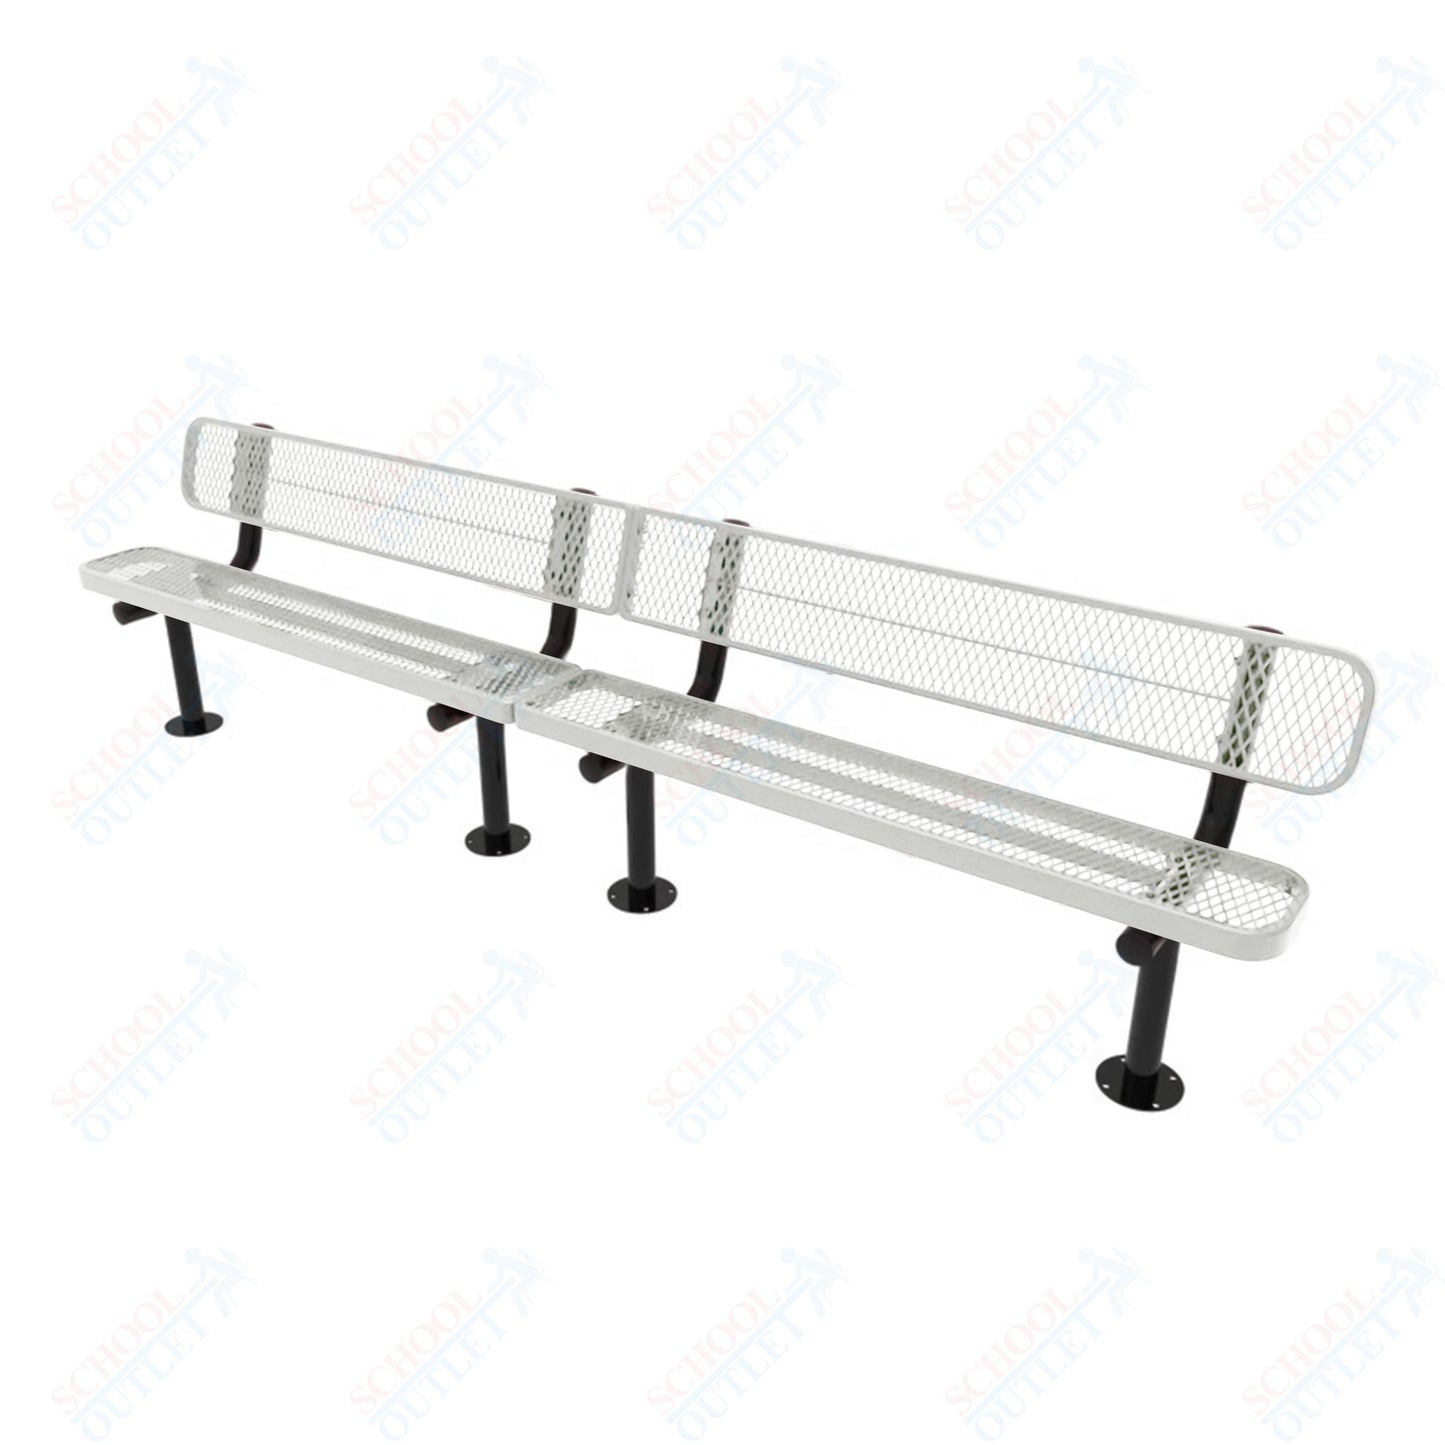 MyTcoat - Standard Outdoor Bench with Back - Surface Mount 10' L (MYT-BRT10-20)